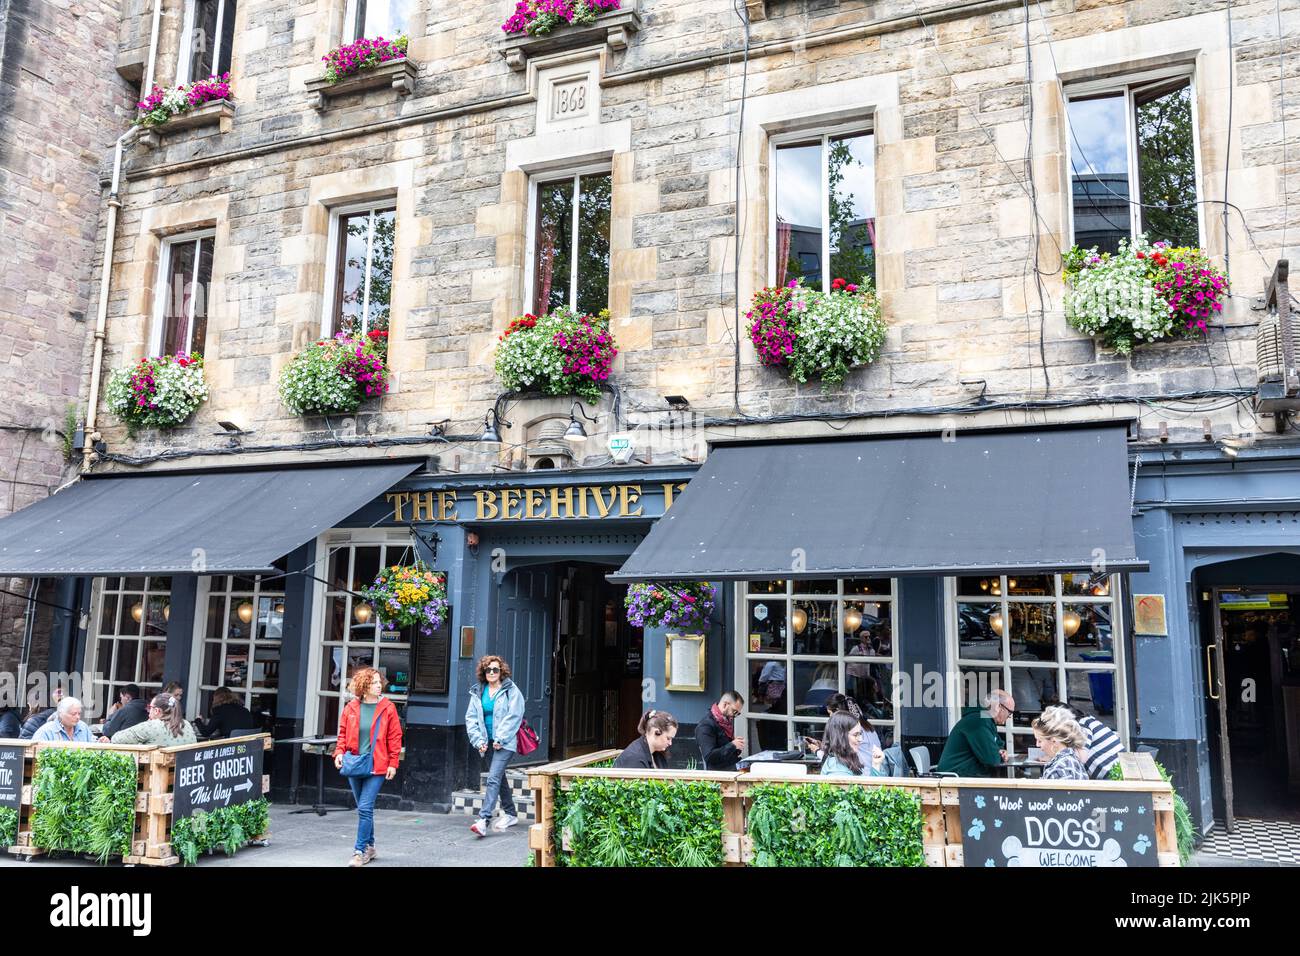 Grassmarket Edinburgh, The Beehive Inn public house, summers day with people drinking outside and flowering hanging baskets,Scotland,UK 2022 Stock Photo